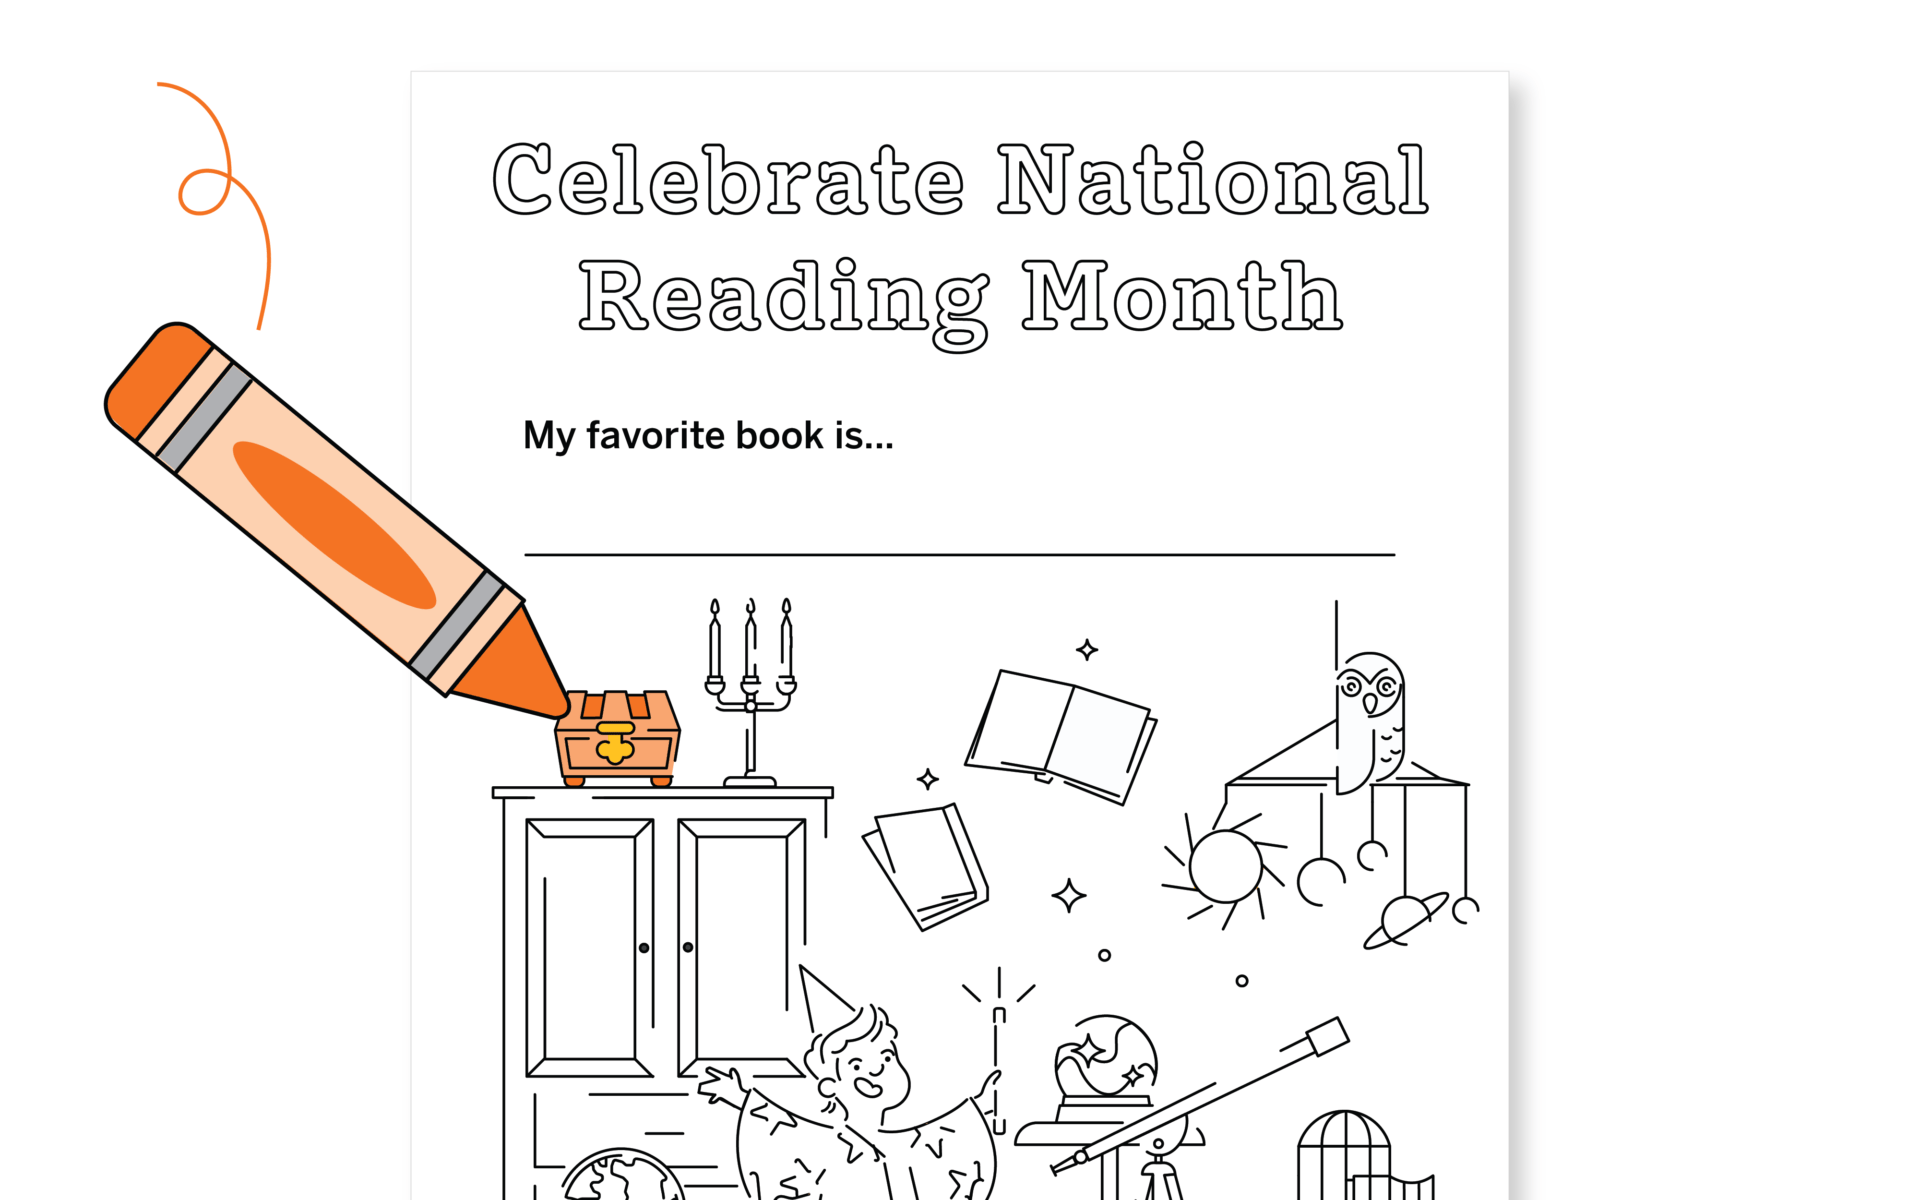 An illustration for national reading month, featuring an elementary school child joyfully imagining scenes from a book, with a giant pencil above a blank section captioned 